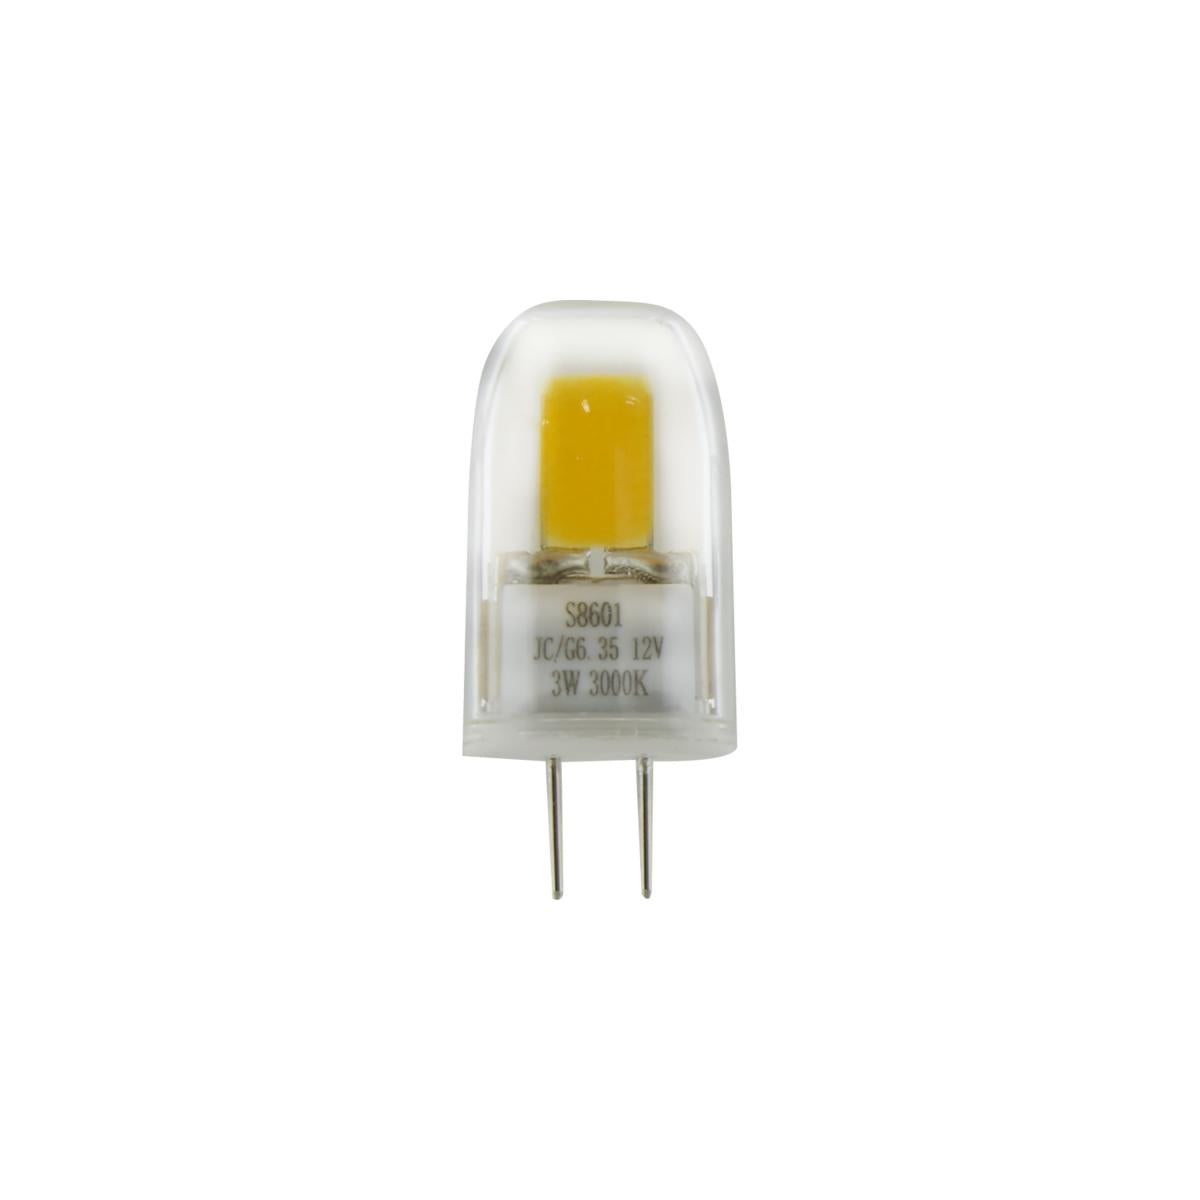 Satco S8601 LED 3W JC/G6.35 12V 3K 300L/CD 3W JC LED 3000K G6.35 base Carded 12 Volt AC/DC Carded